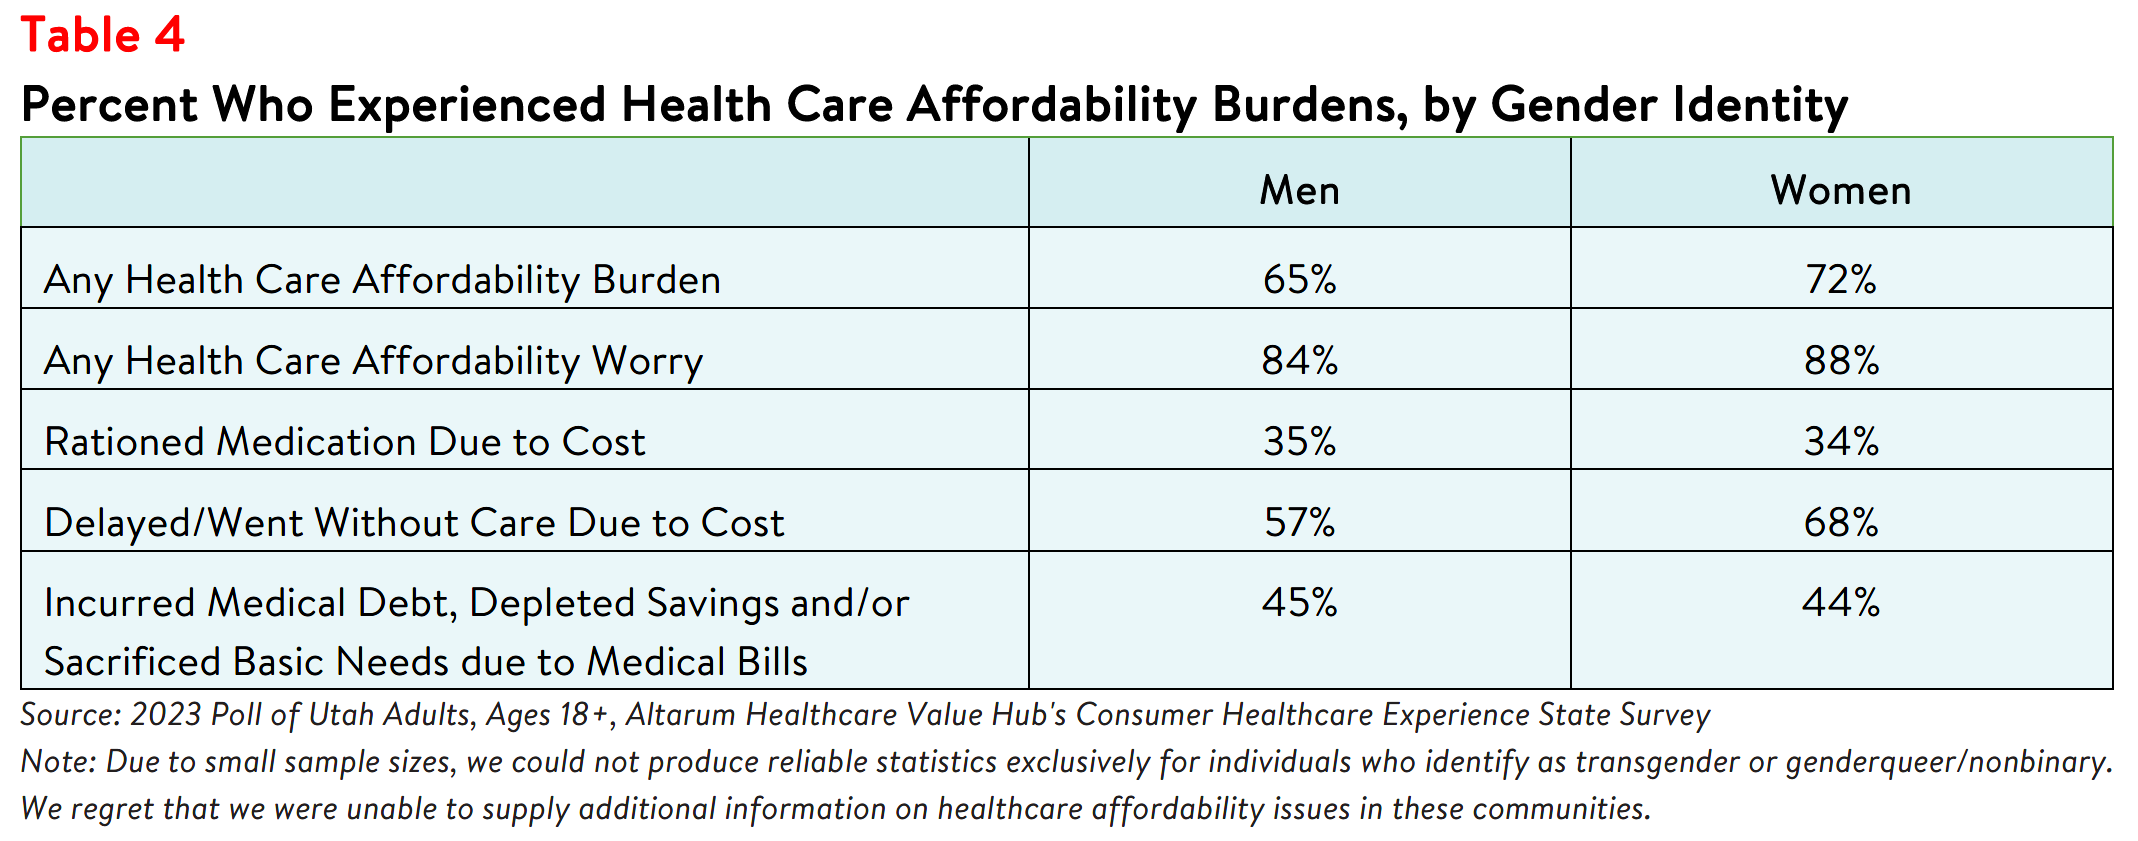 Utah Residents Bear Health Care Affordability Burdens Unequally_Table4.png